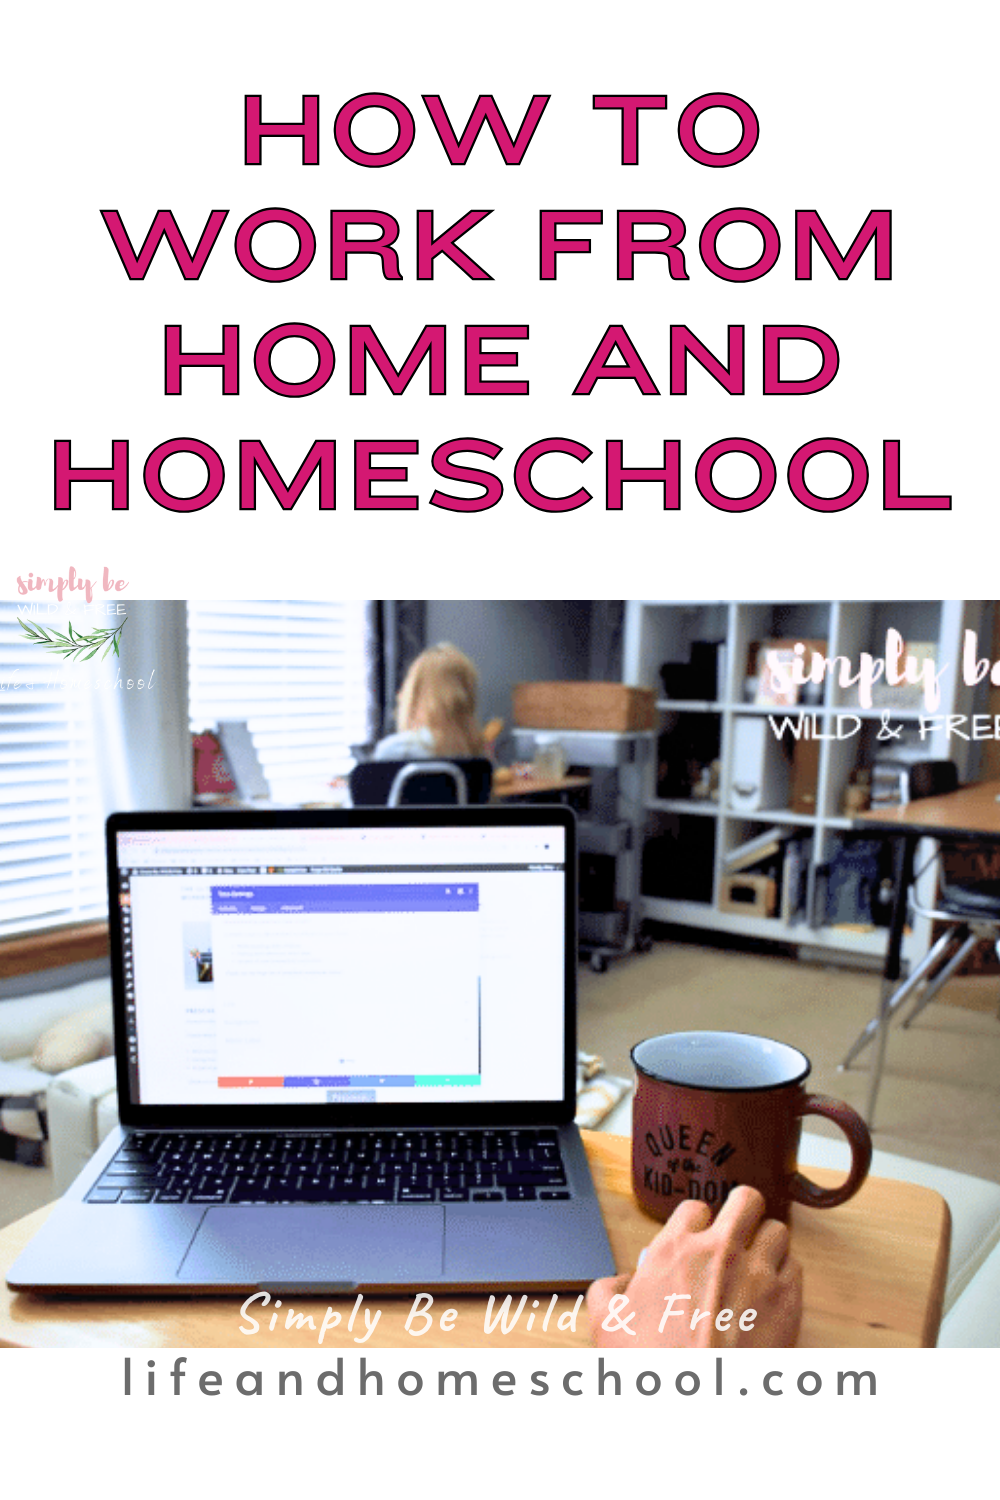 Working from Home and Homeschooling